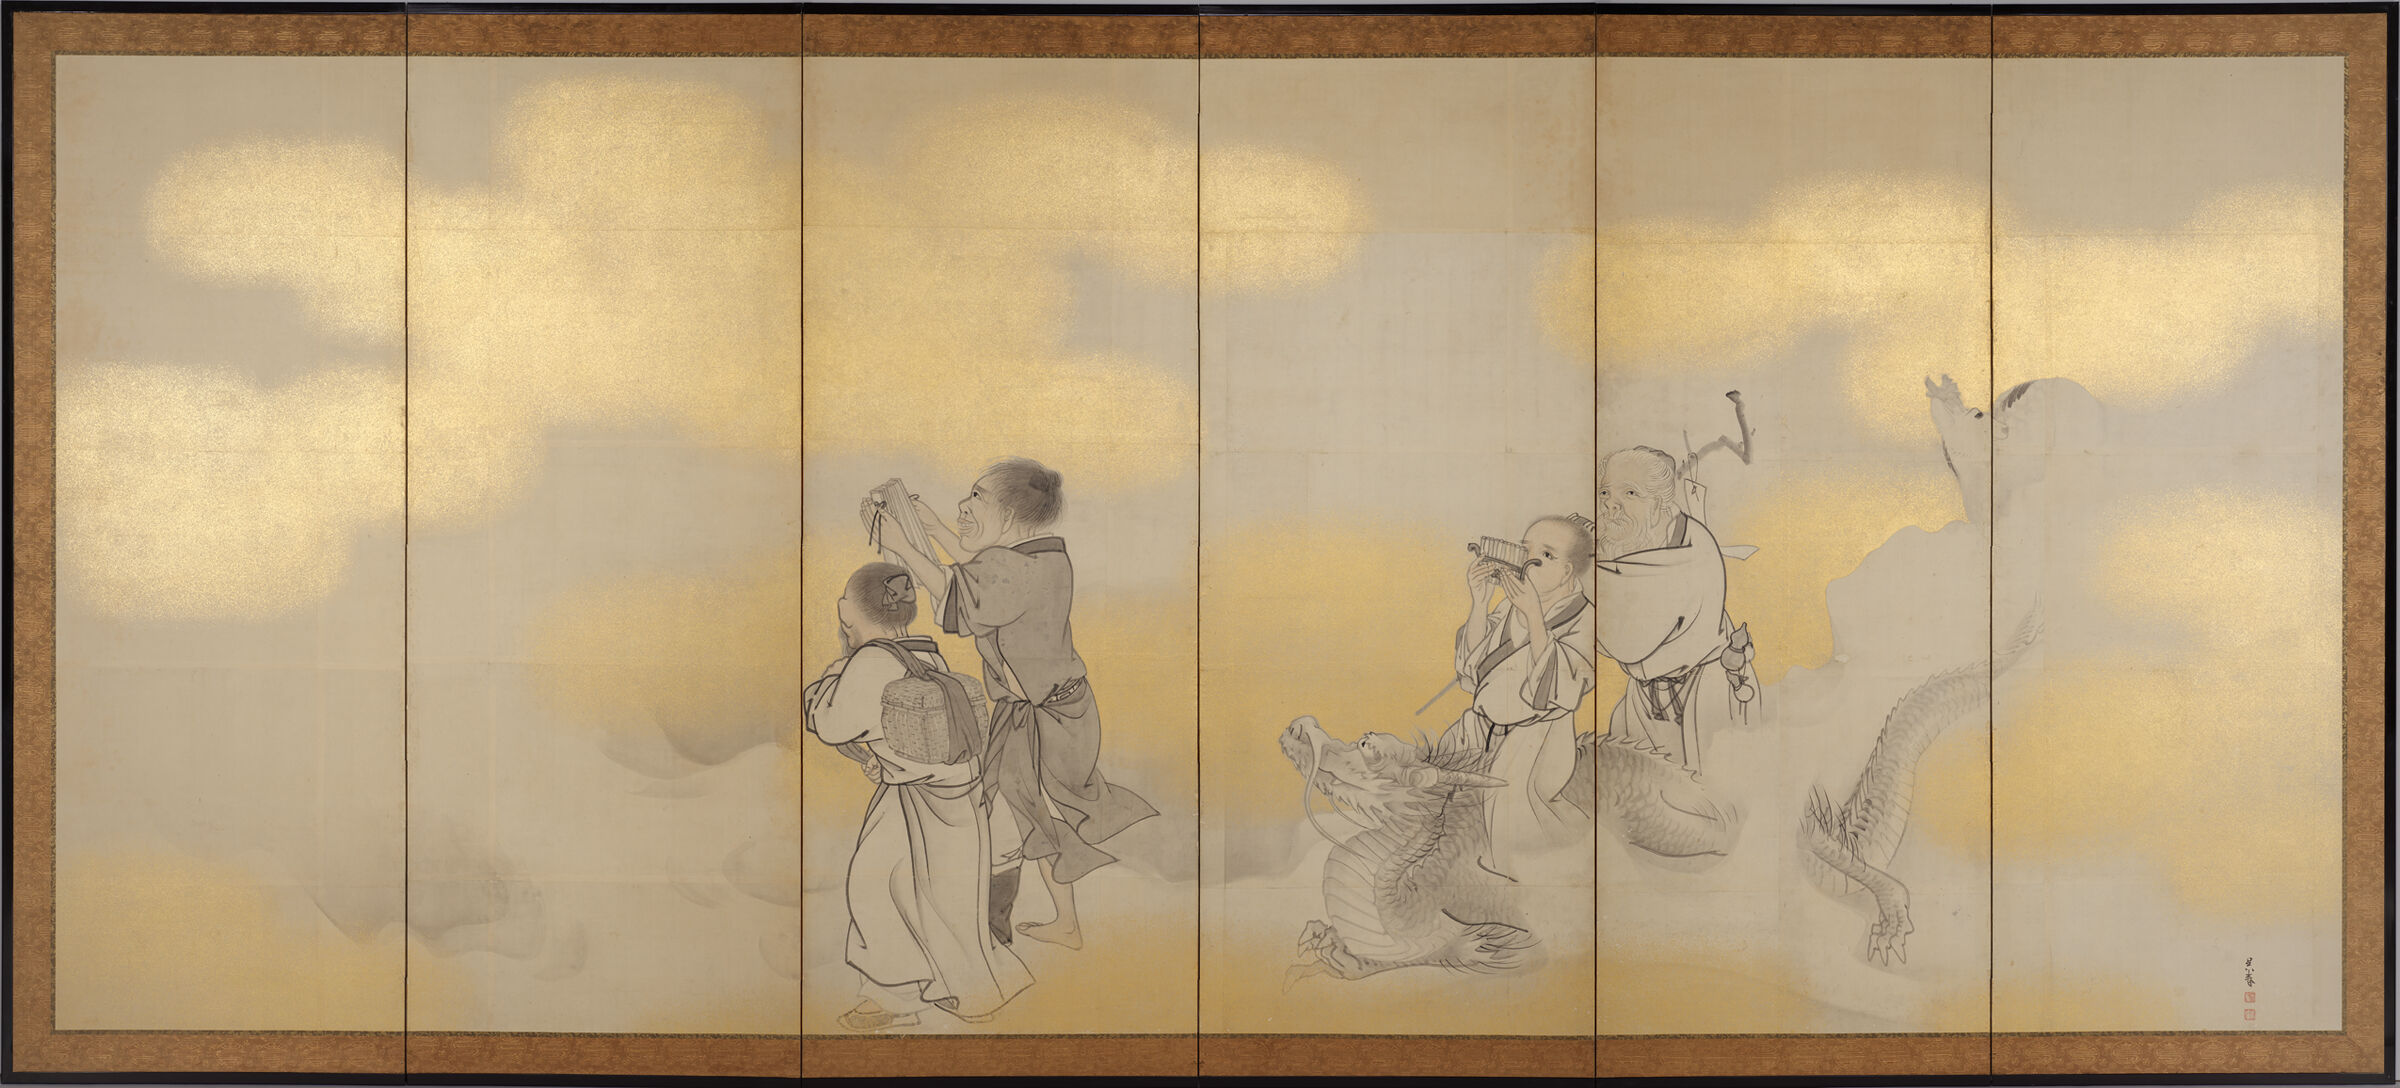 Seven Chinese Immortals (Right Screen)